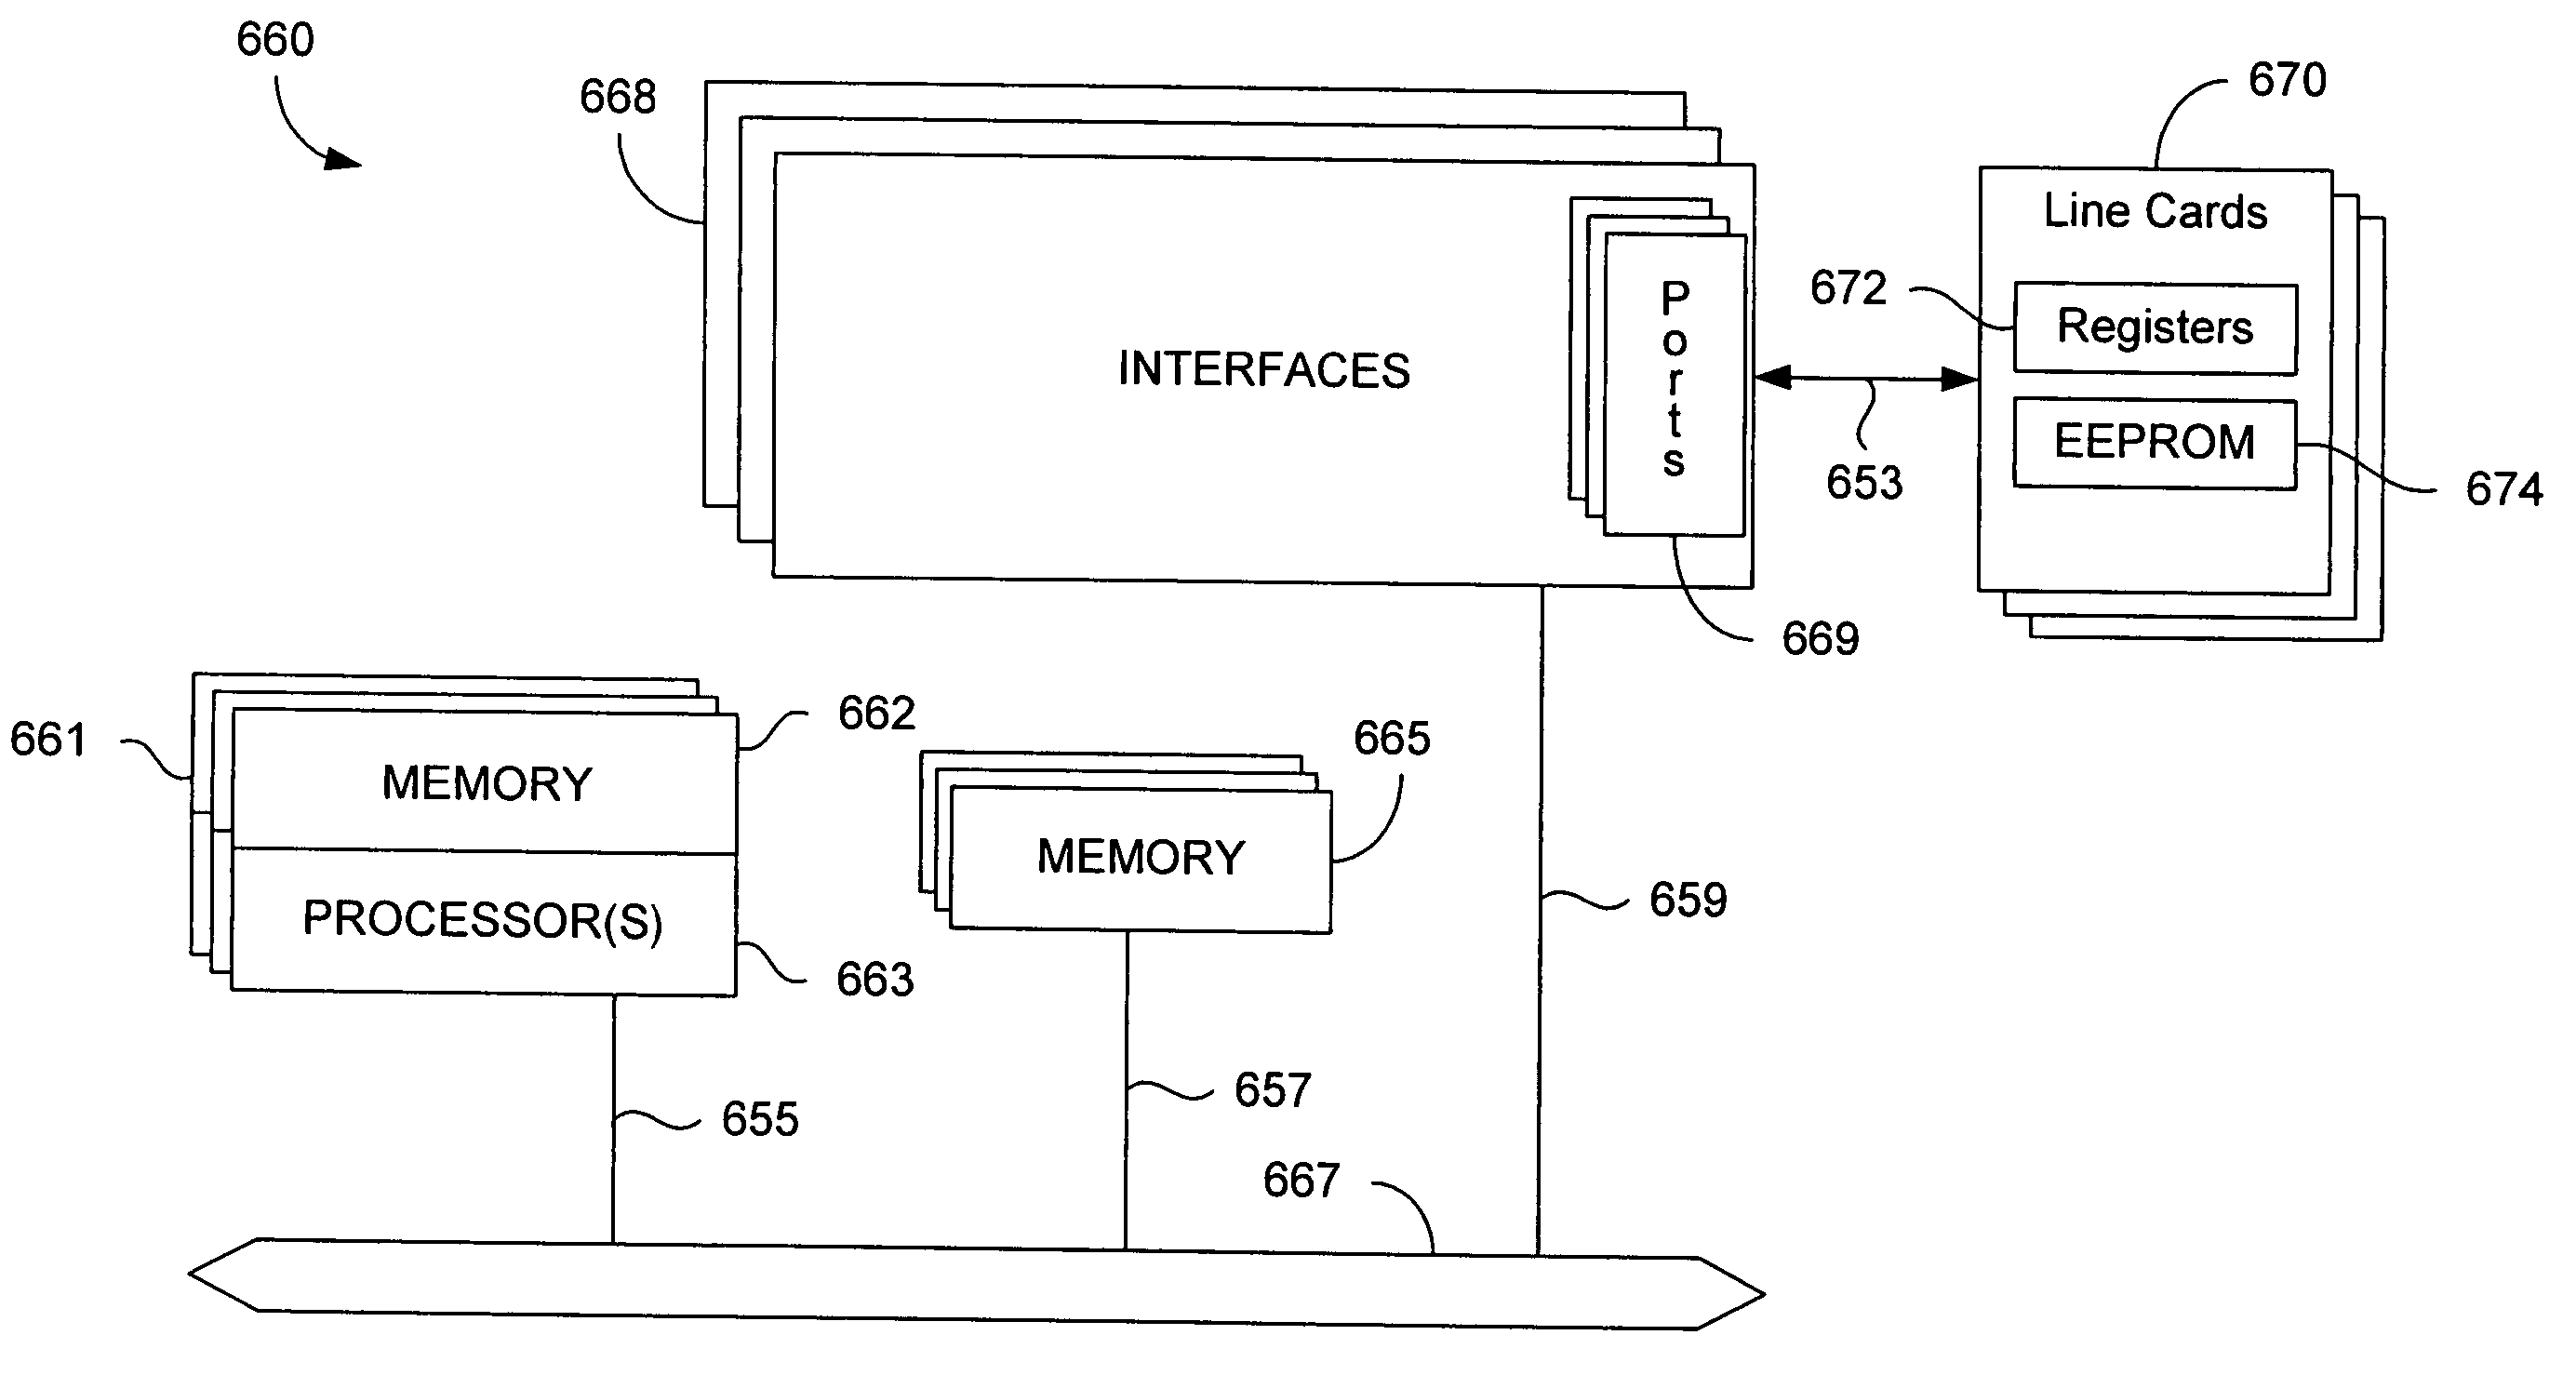 Automated configuration of network device ports